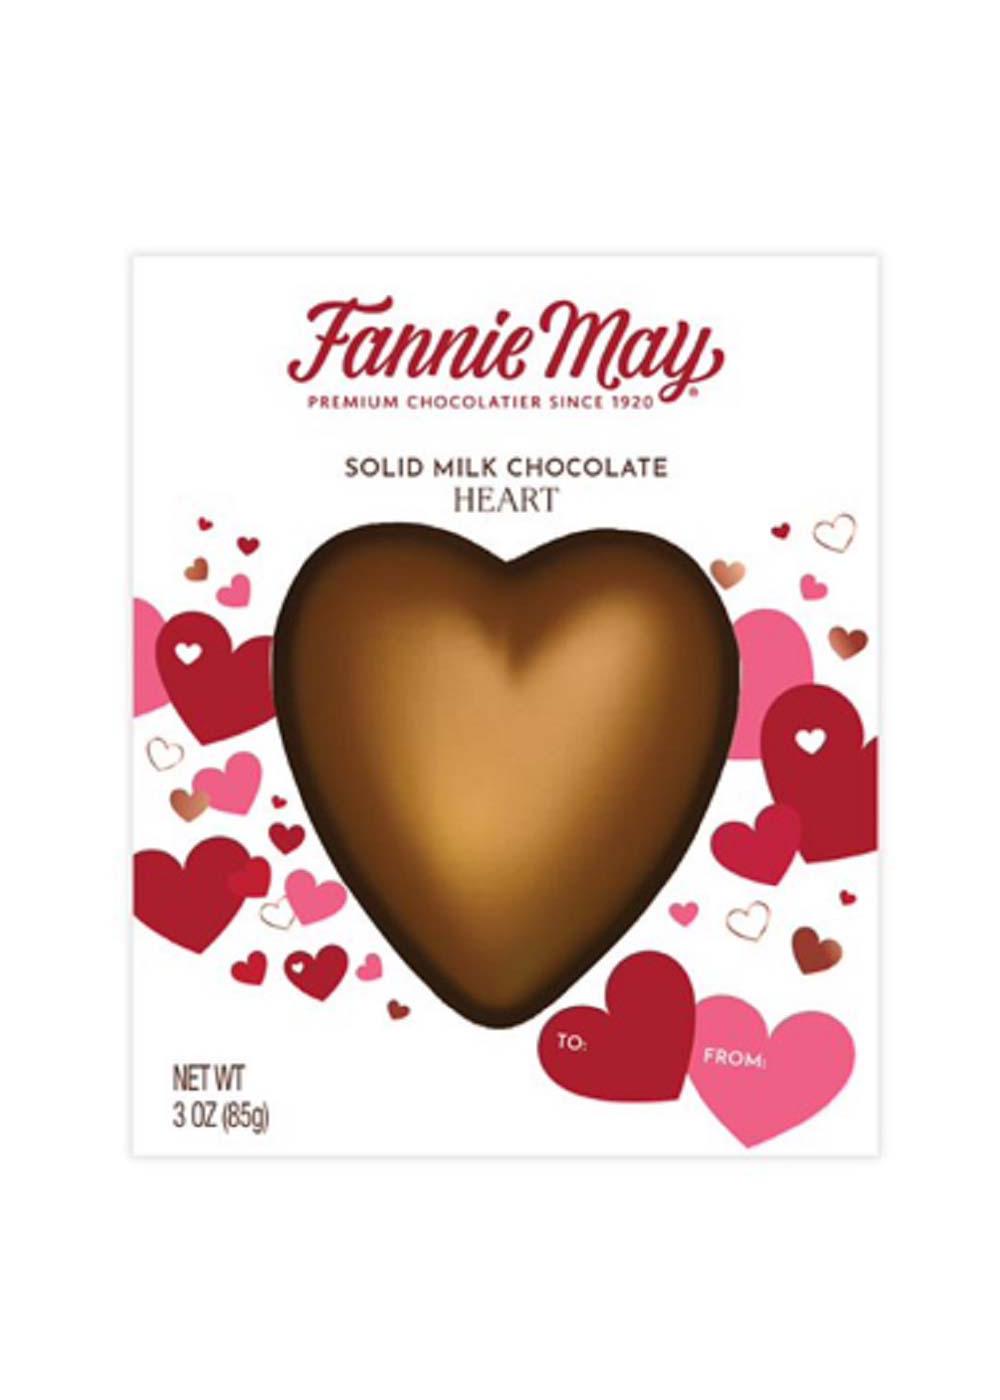 Fannie May Solid Milk Chocolate Heart Valentine's Candy; image 1 of 2